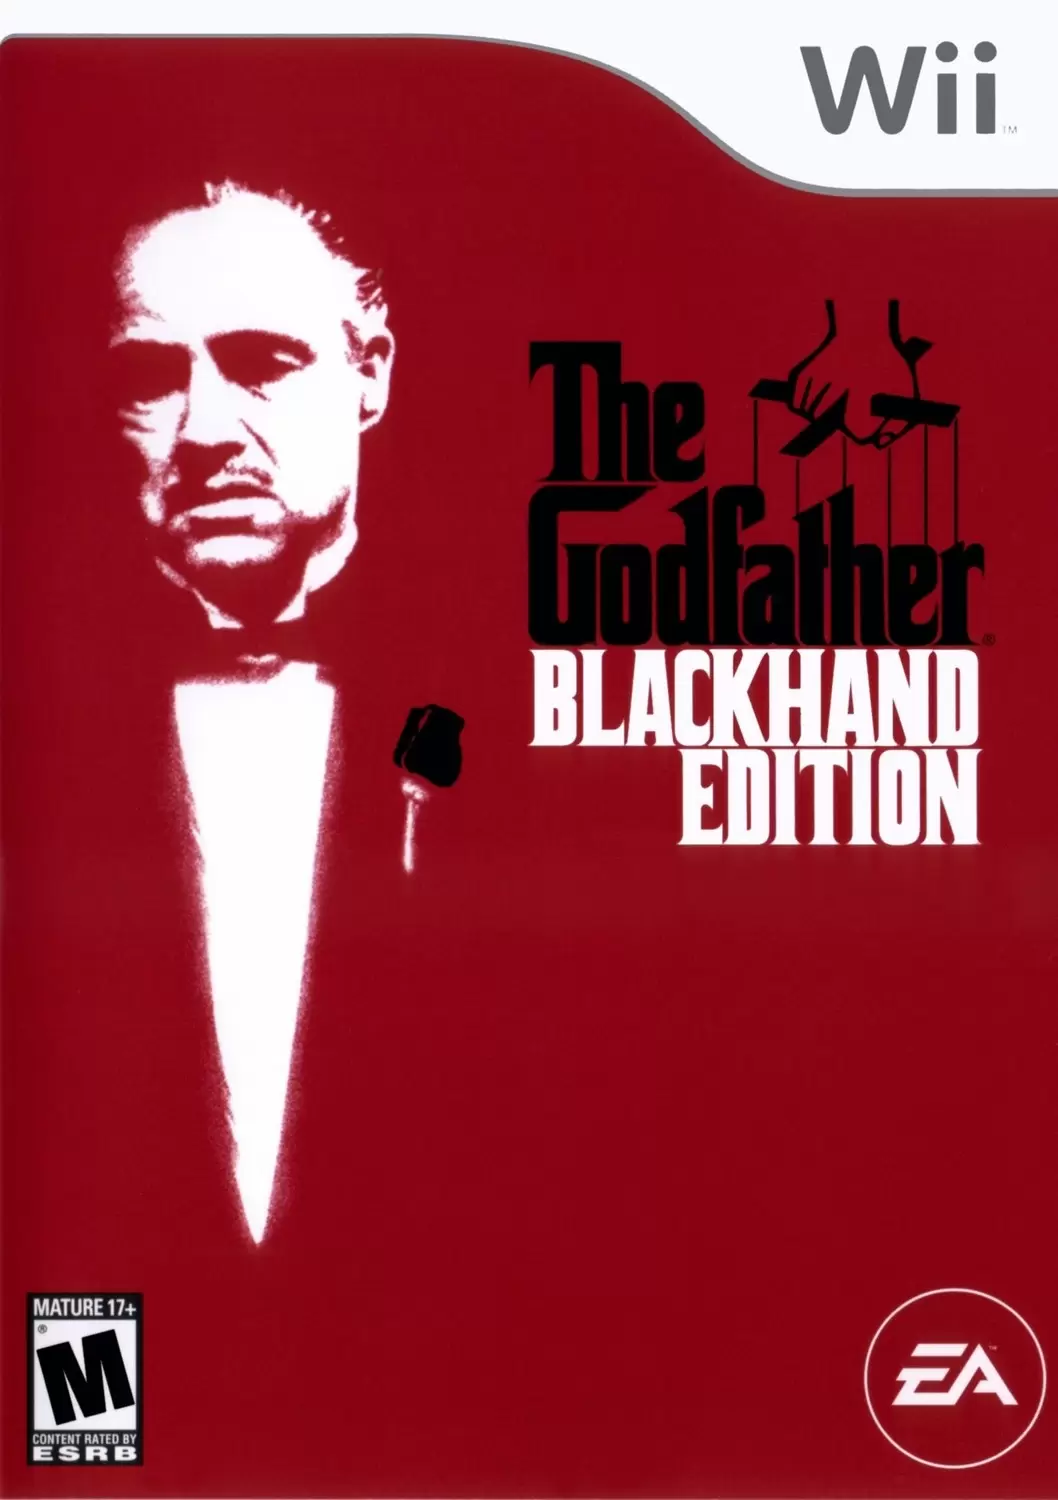 Nintendo Wii Games - The Godfather: Blackhand Edition